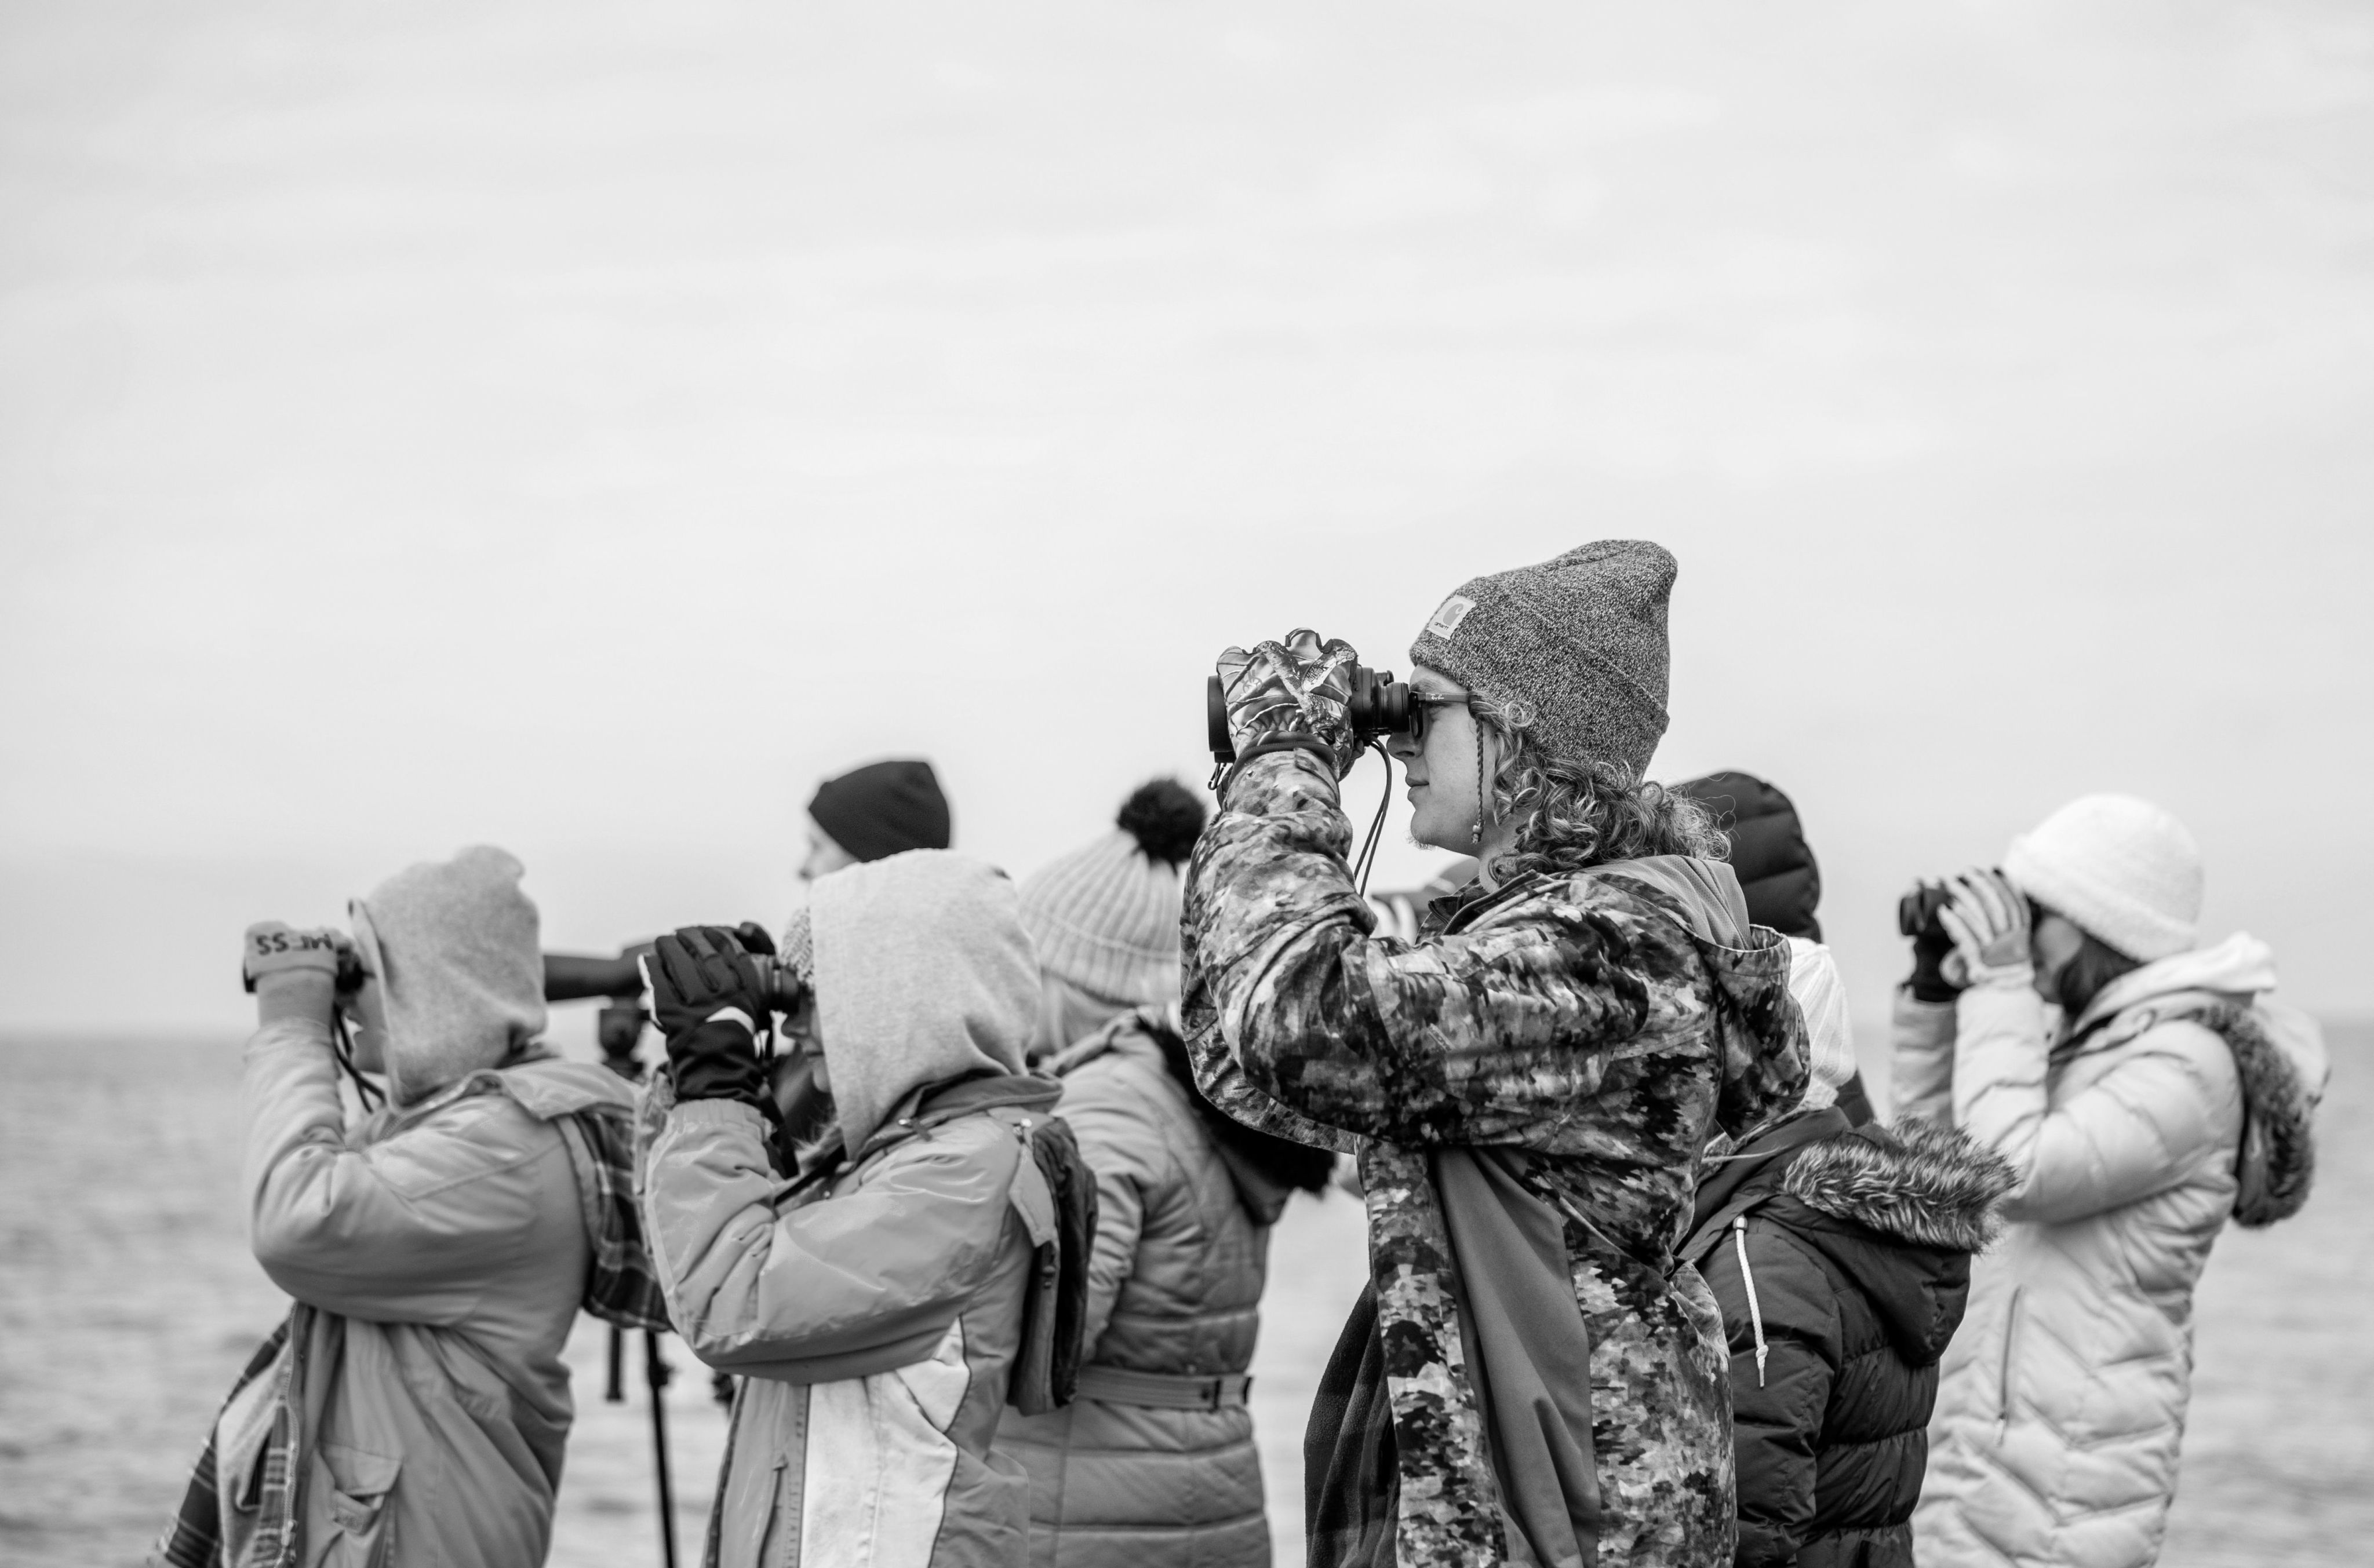 students on a boat in warm jackets, hoods and hats look through binoculars